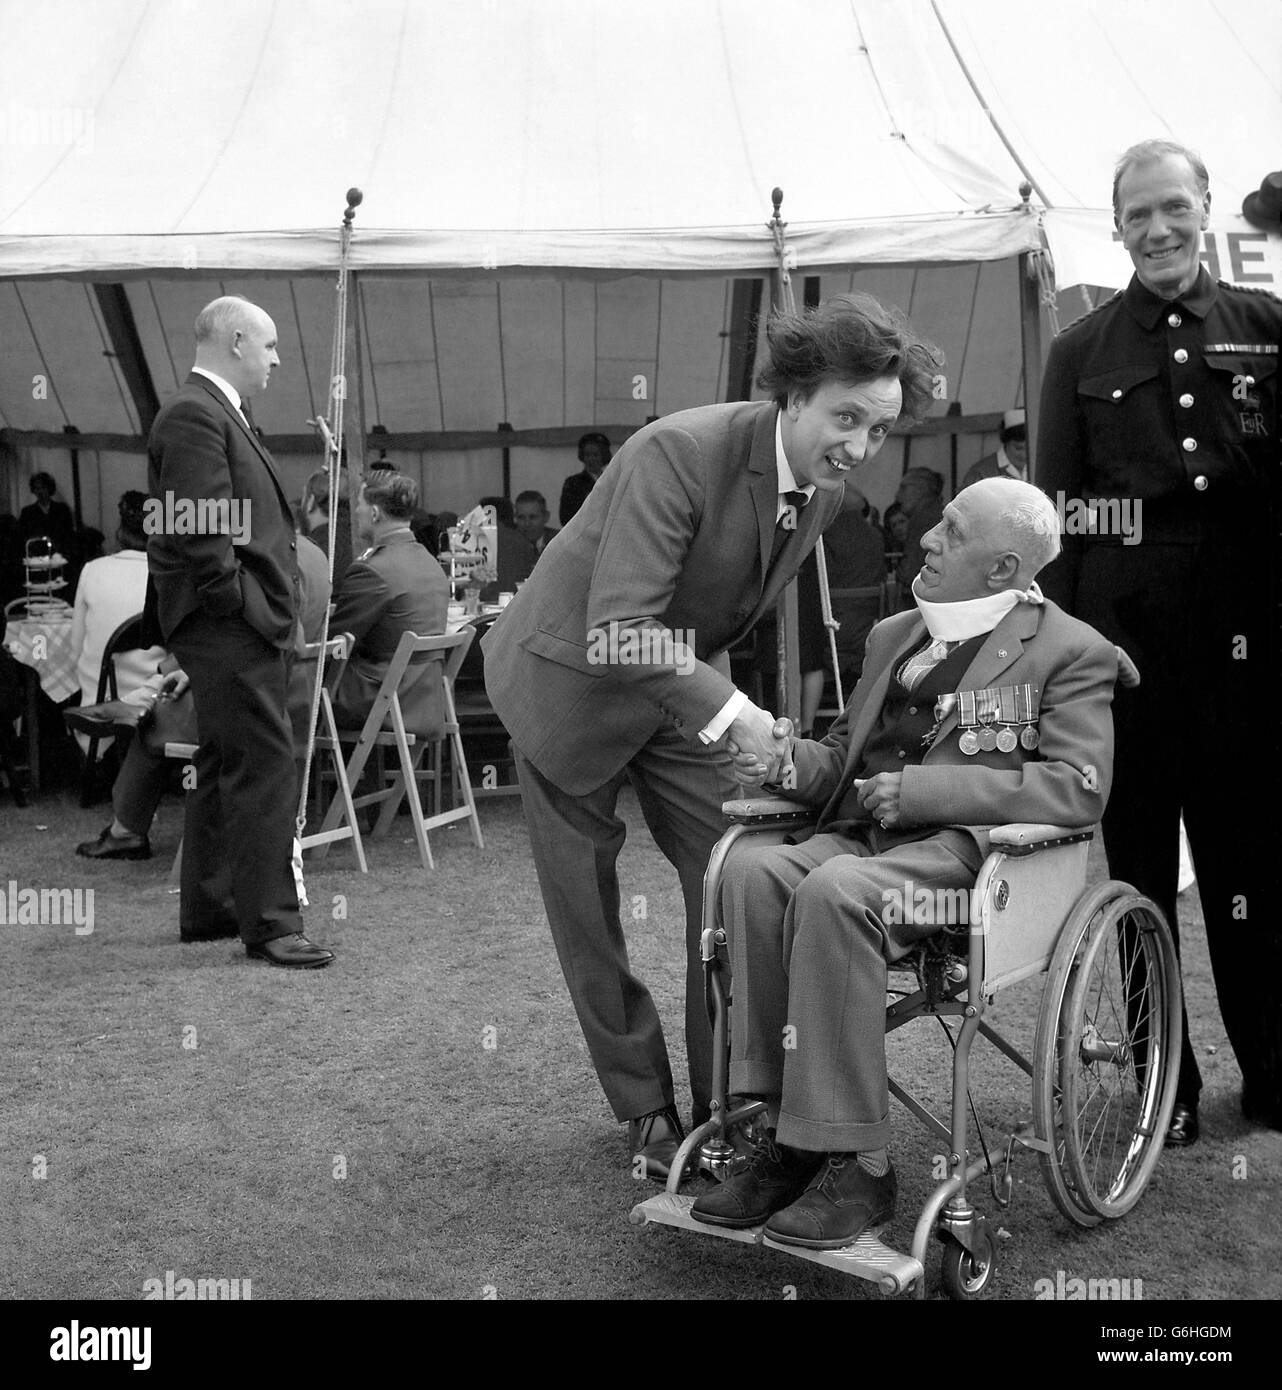 Liverpool comedian Ken Dood chats with fellow Lancastrian variety veteran Mr Harry Leslie, aged 76, at the 'Not Forgotten' Association's garden party in the grounds of Buckingham Palace. Harry, now an inmate of the Variety Artists Home at Twickenham, Middlesex, is a native of Everton. He first appeared on the stage at the age of 10 and performed continuously until forced to give up from a disablement reveived in the World War. Ken Dodd, now appearing at the London Palladium, was one of thecompany who entertained guests at the party. Stock Photo